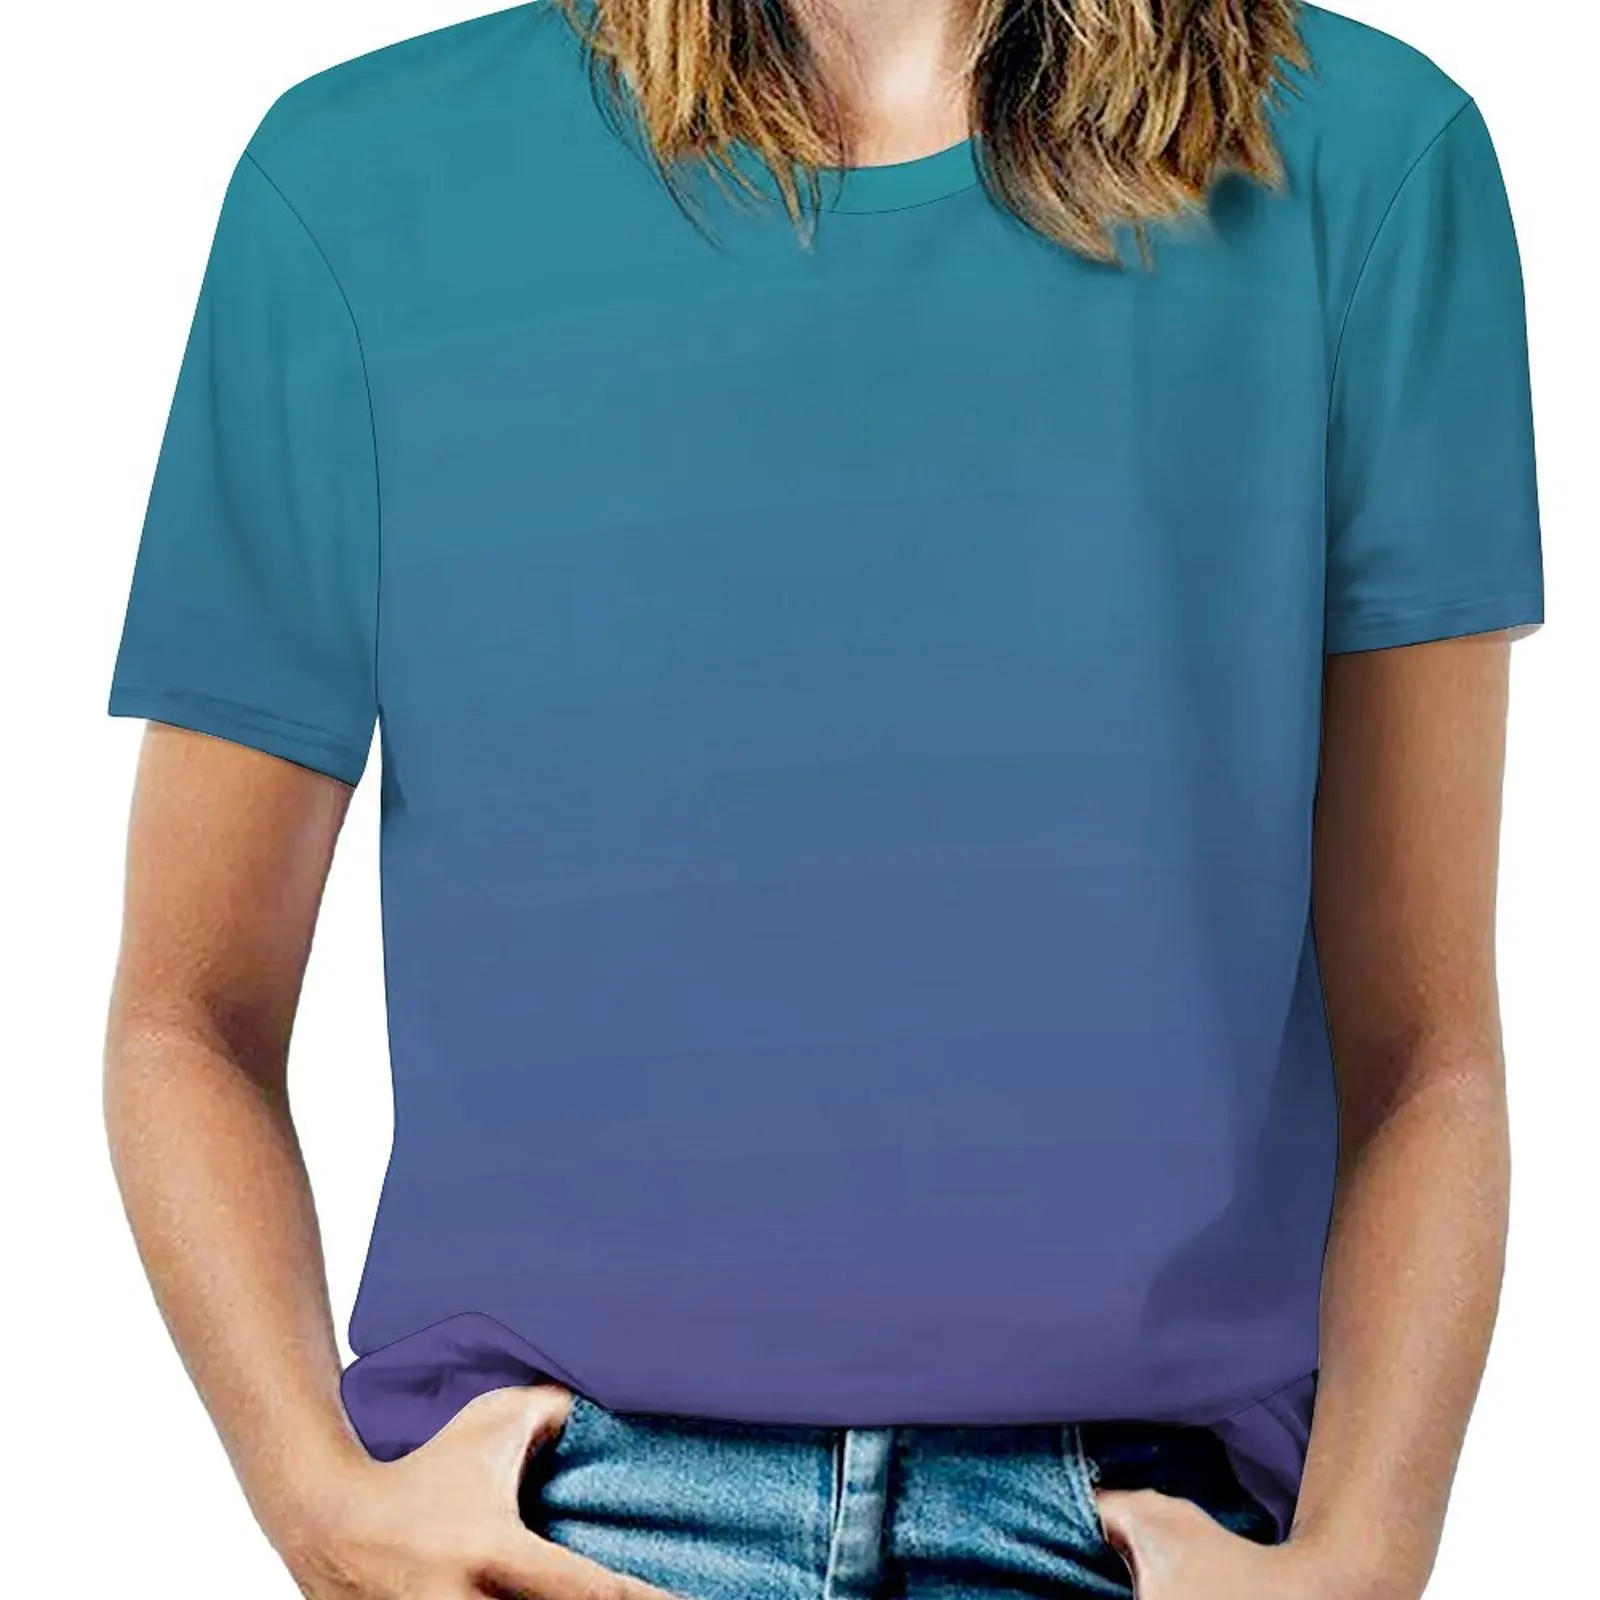 

Ombre | Gradient Colors | Teal And Purple | Fashion Print Women Ladies Girls T-Shirt Harajuku Round Neck Short Sleeve Tops &